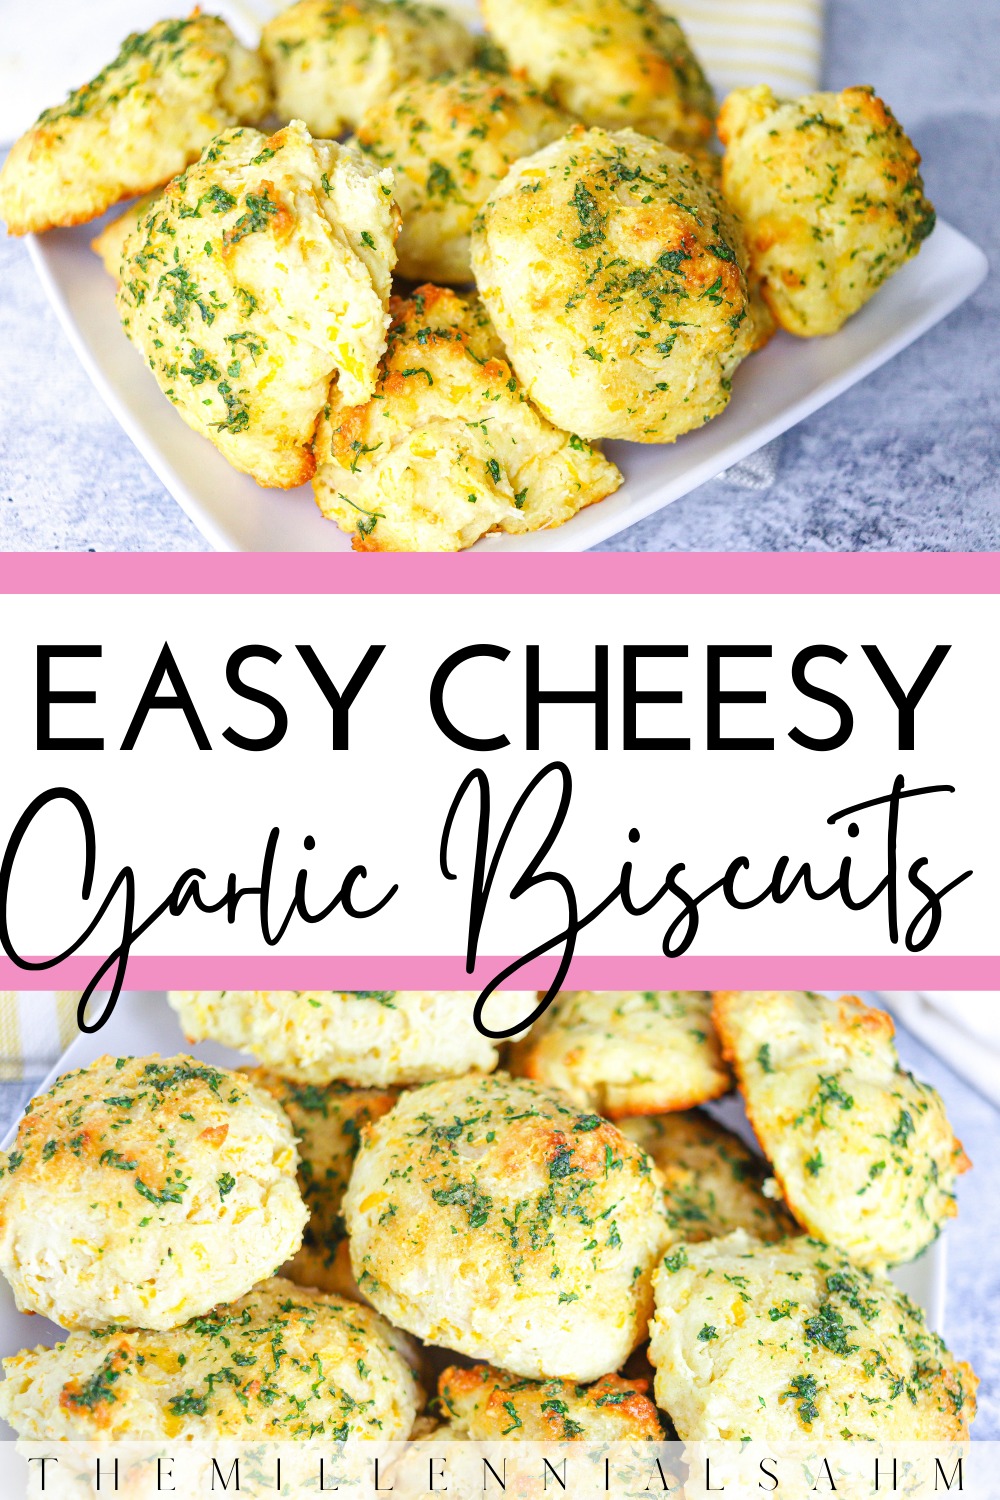 These Easy Cheesy Garlic Biscuits are made with two kinds of cheeses and easily come together in only 30 minutes.